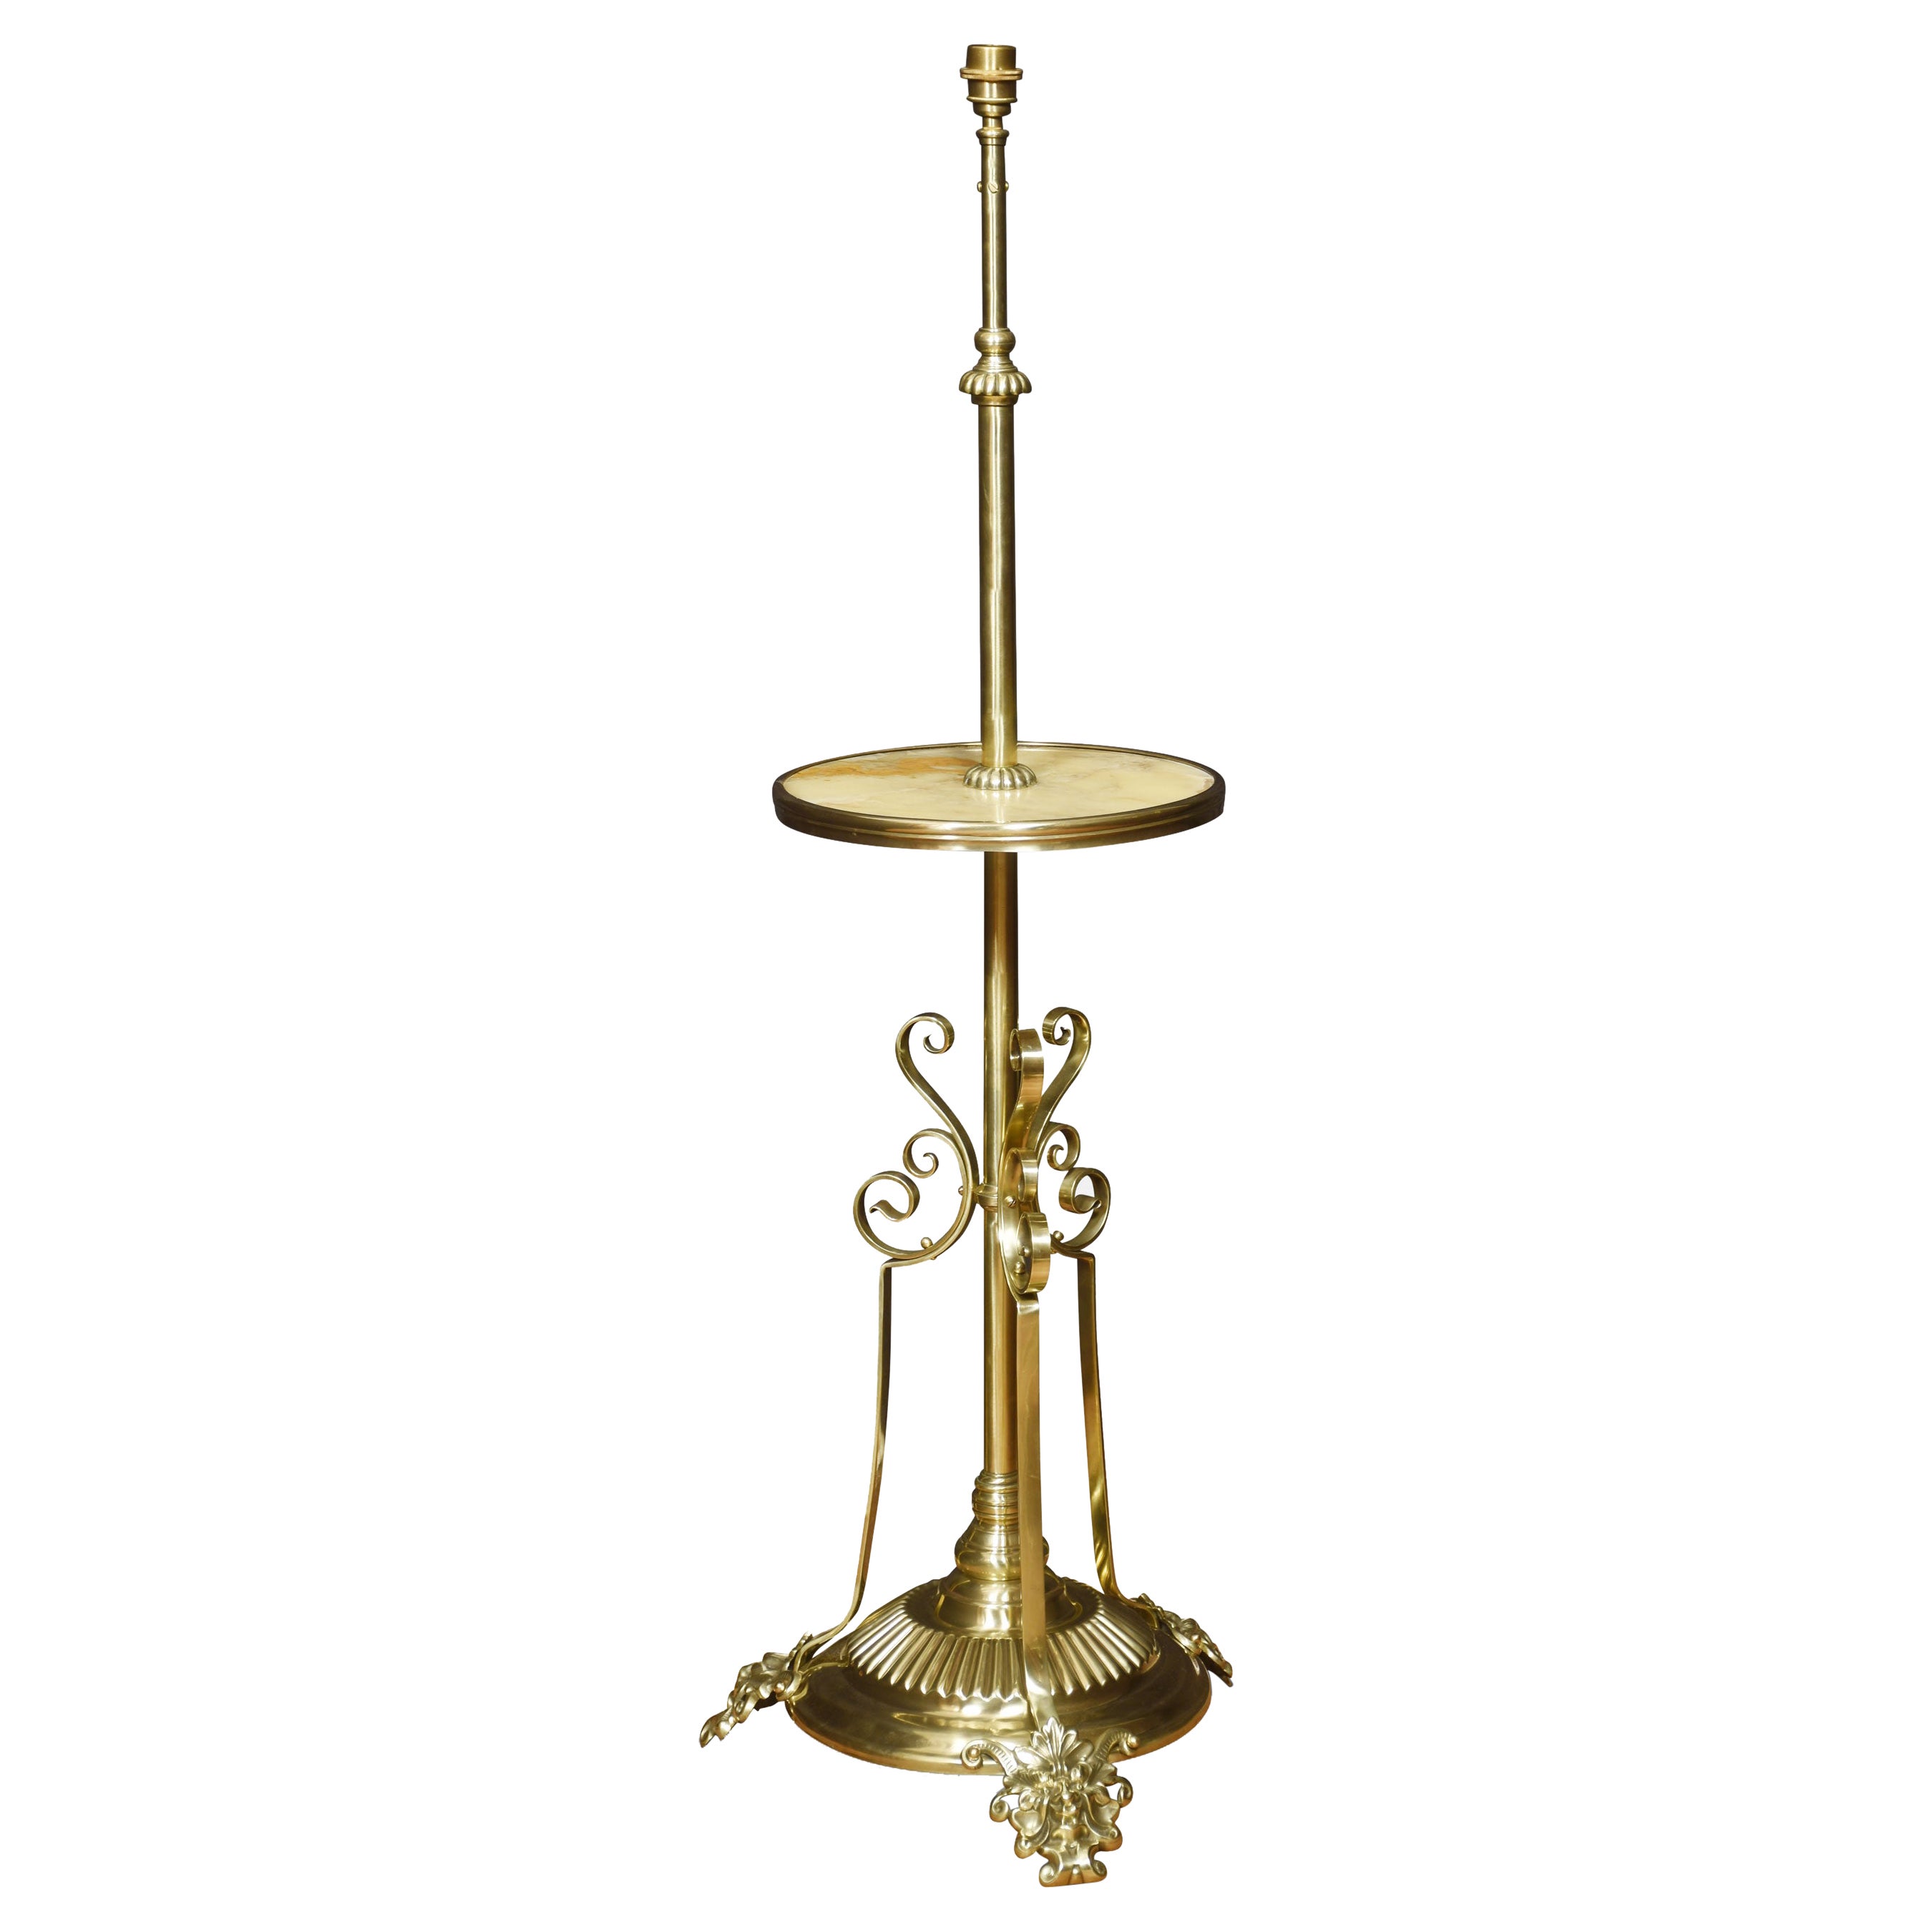 Onyx and Brass Adjustable Standard Lamp For Sale